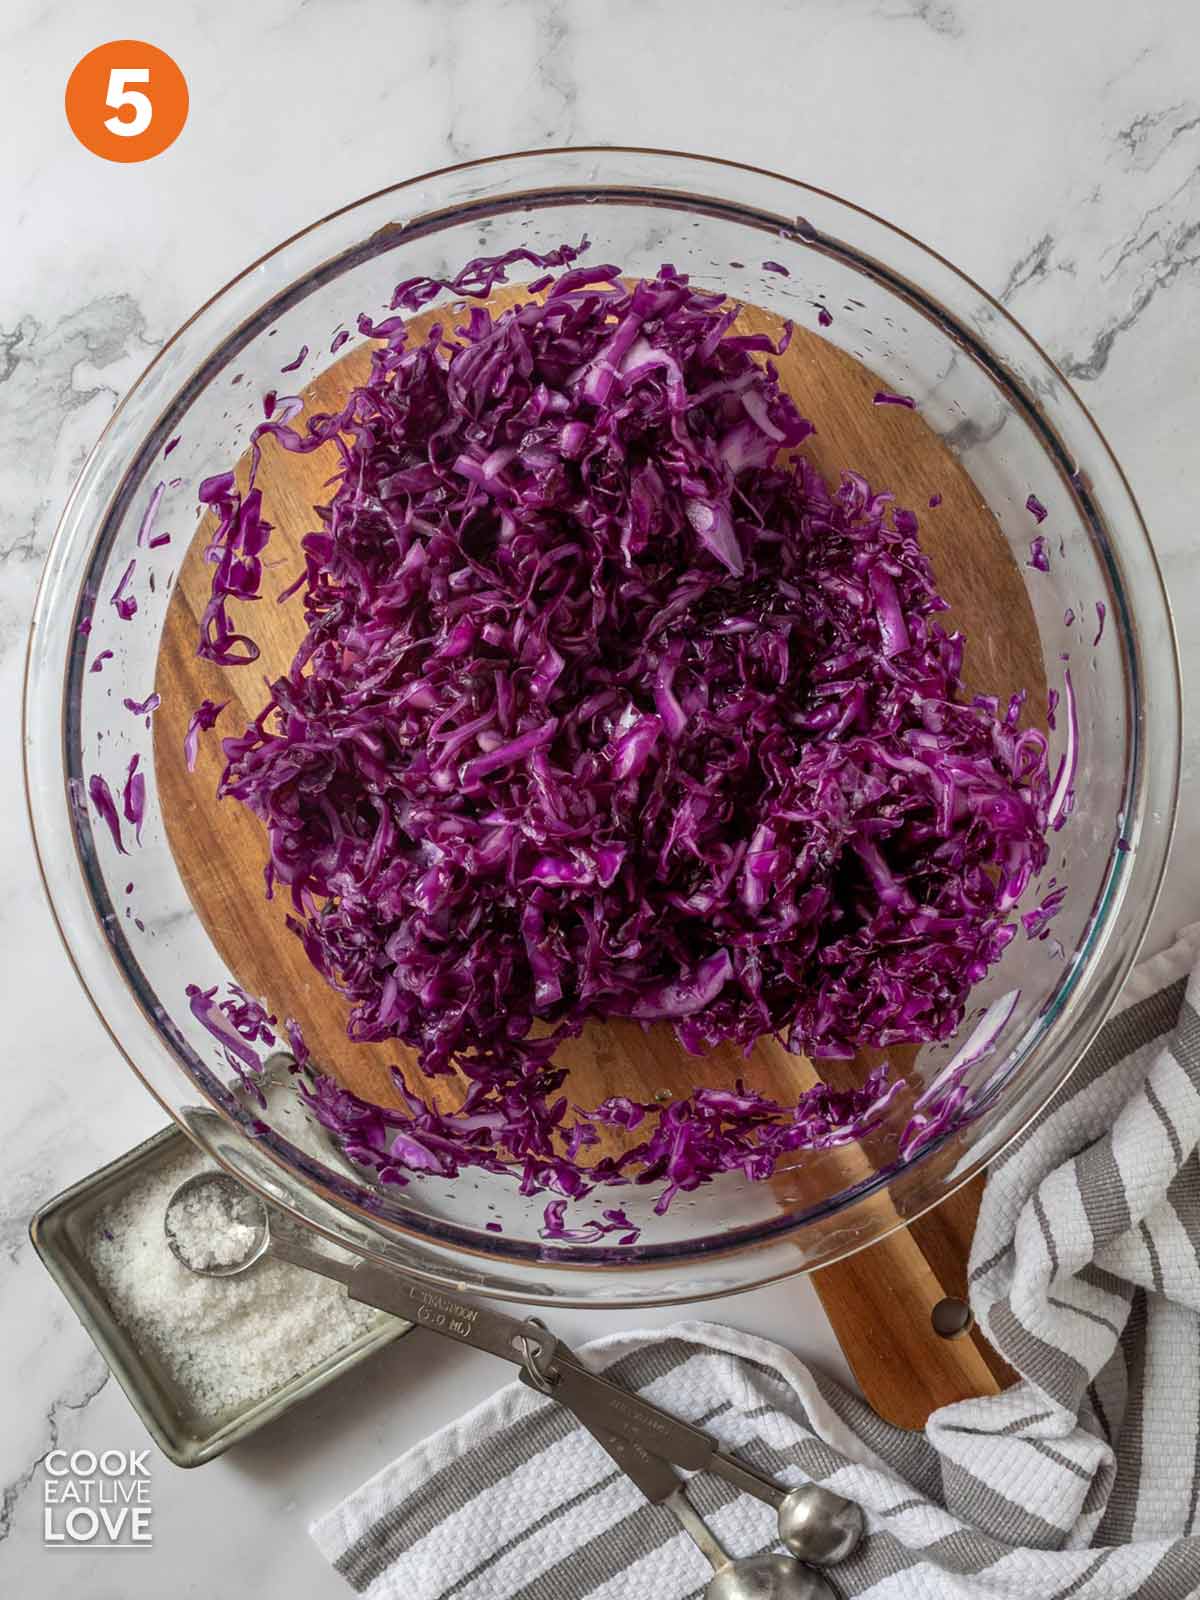 Shredded cabbage in a bowl after massaging.